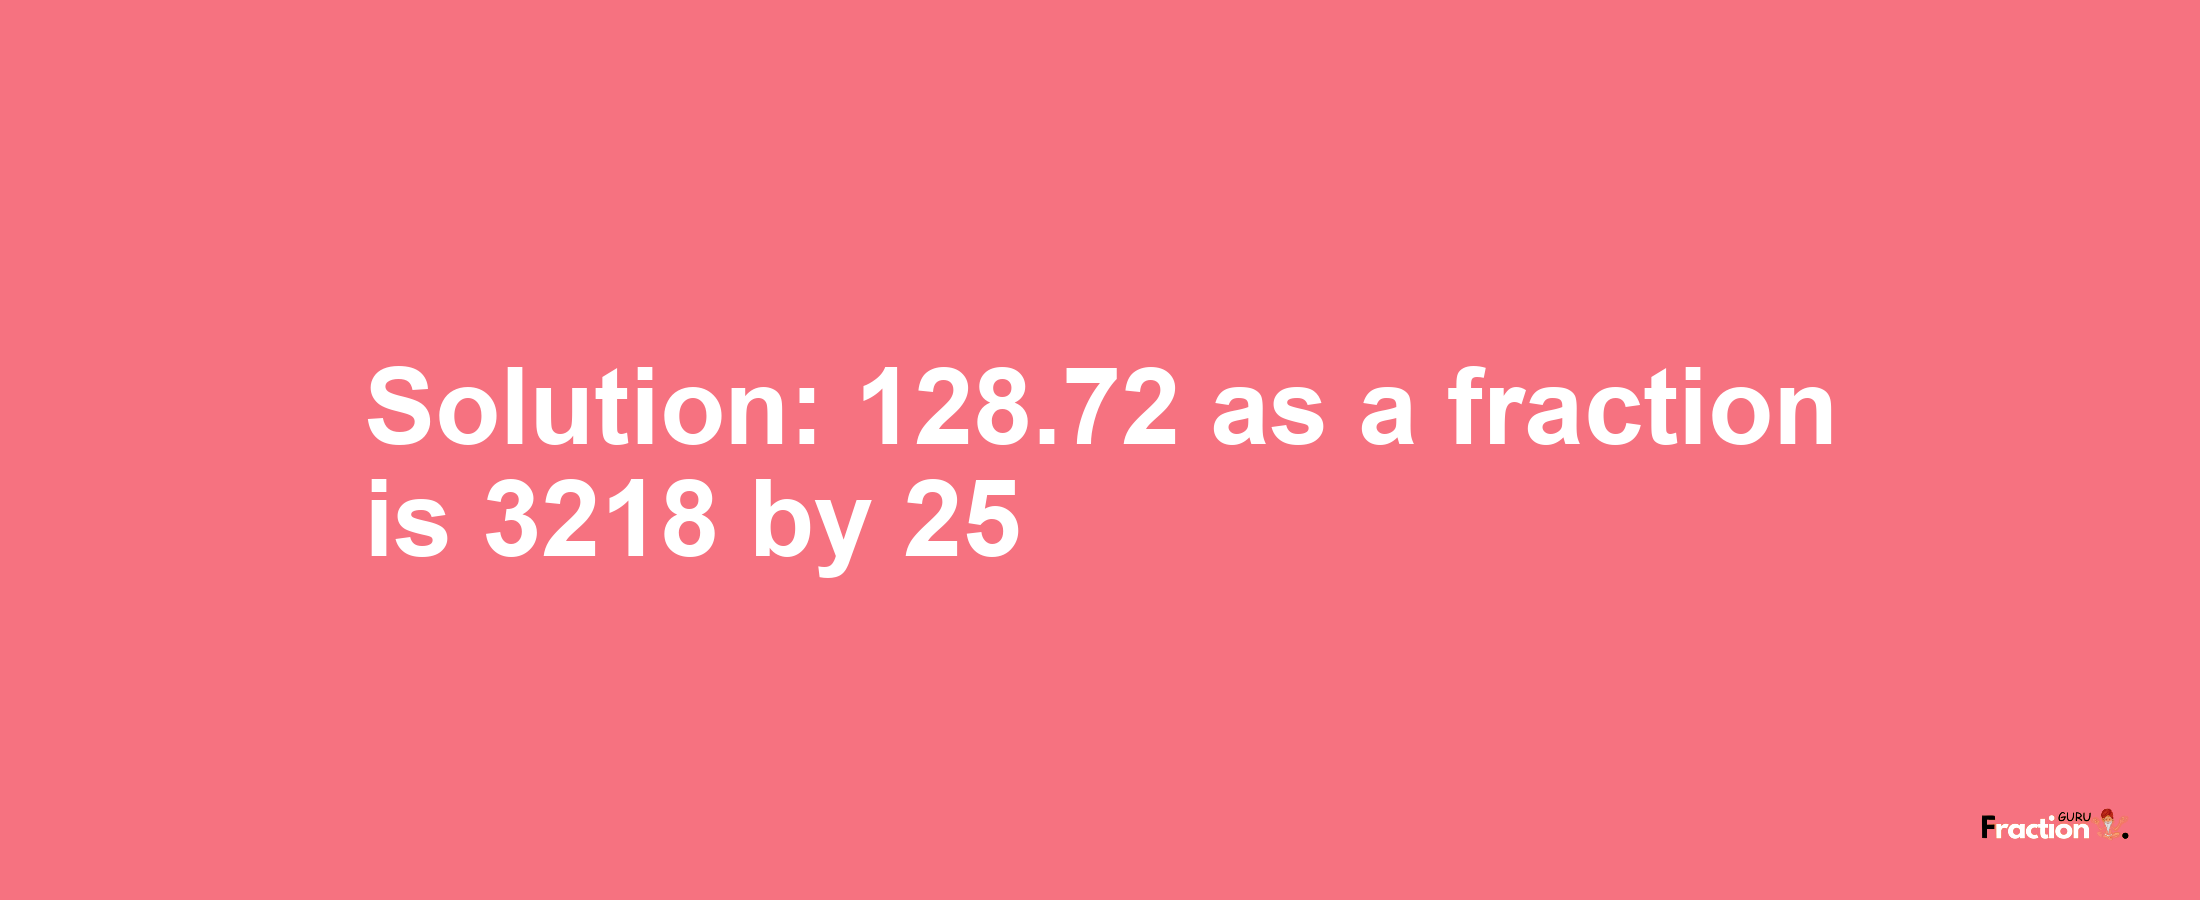 Solution:128.72 as a fraction is 3218/25